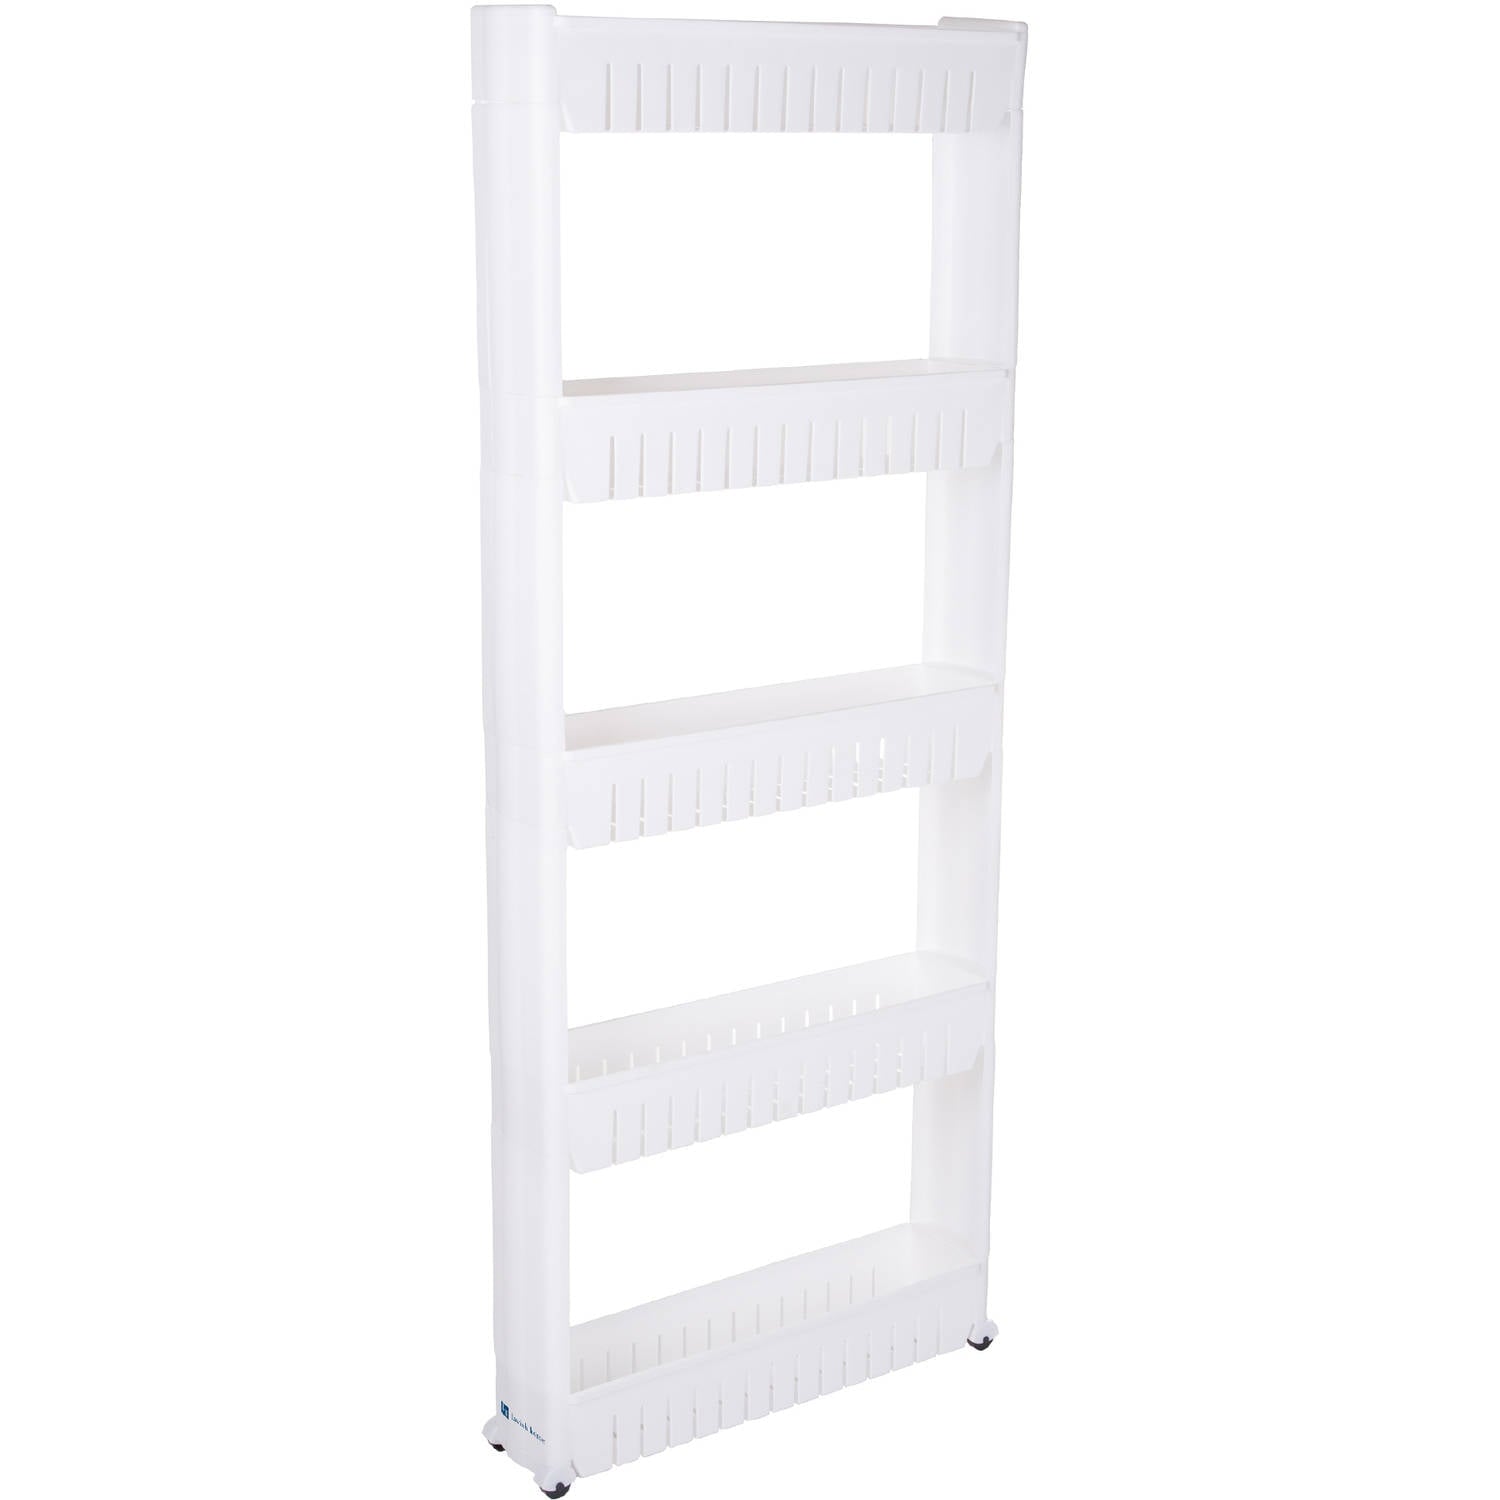 Slide-Out Pantry Storage Rack - 5-Tier White Plastic Pantry Organization and Storage Rolling Cart With Baskets for Narrow Spaces by Lavish Home